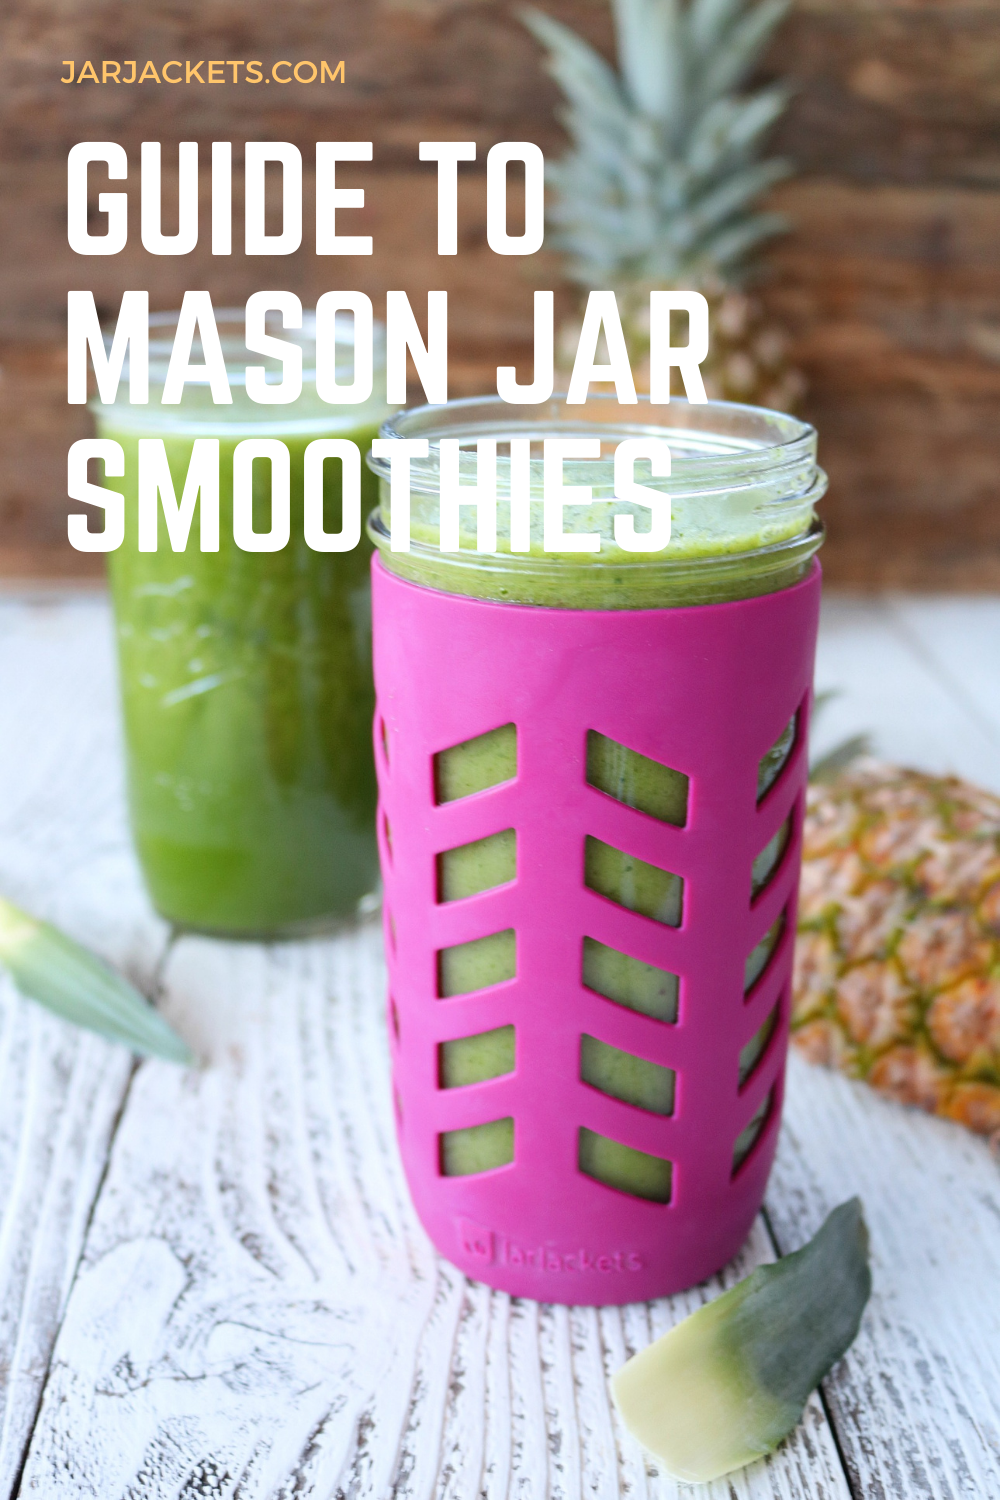 Freezer Smoothies in Mason Jars, Grab and Go